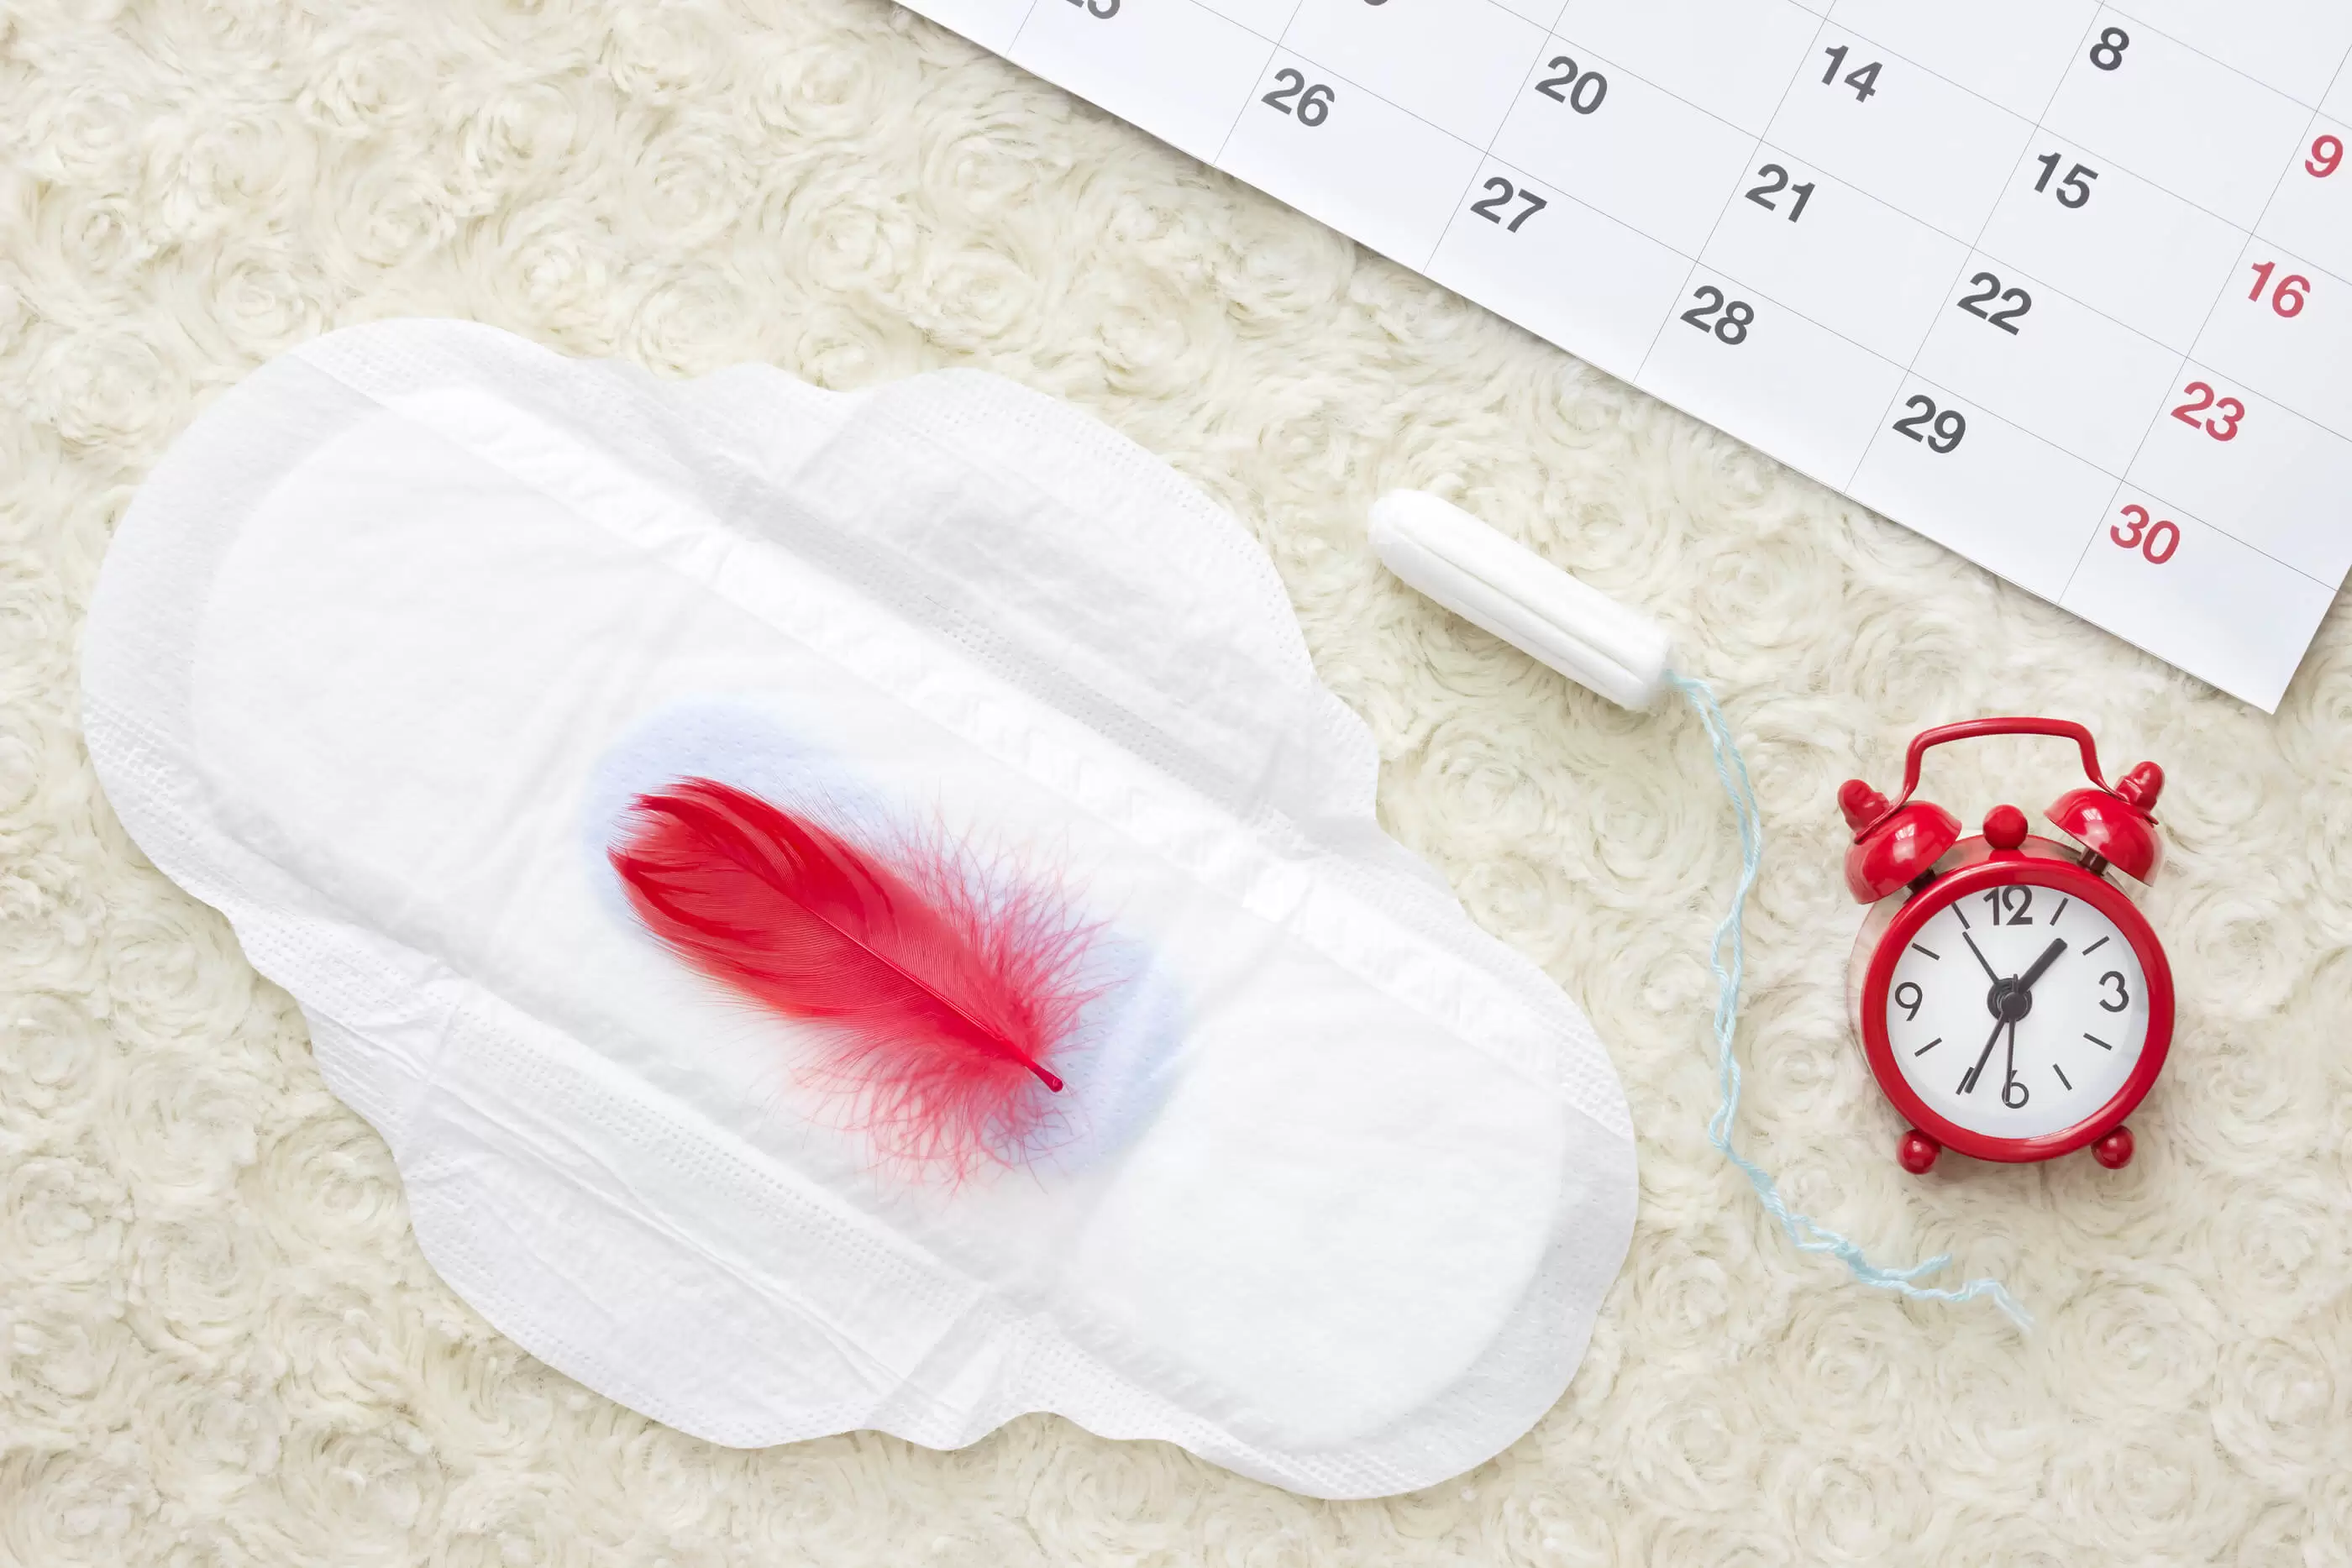 So many men in the comments were mad at the period pain simulator